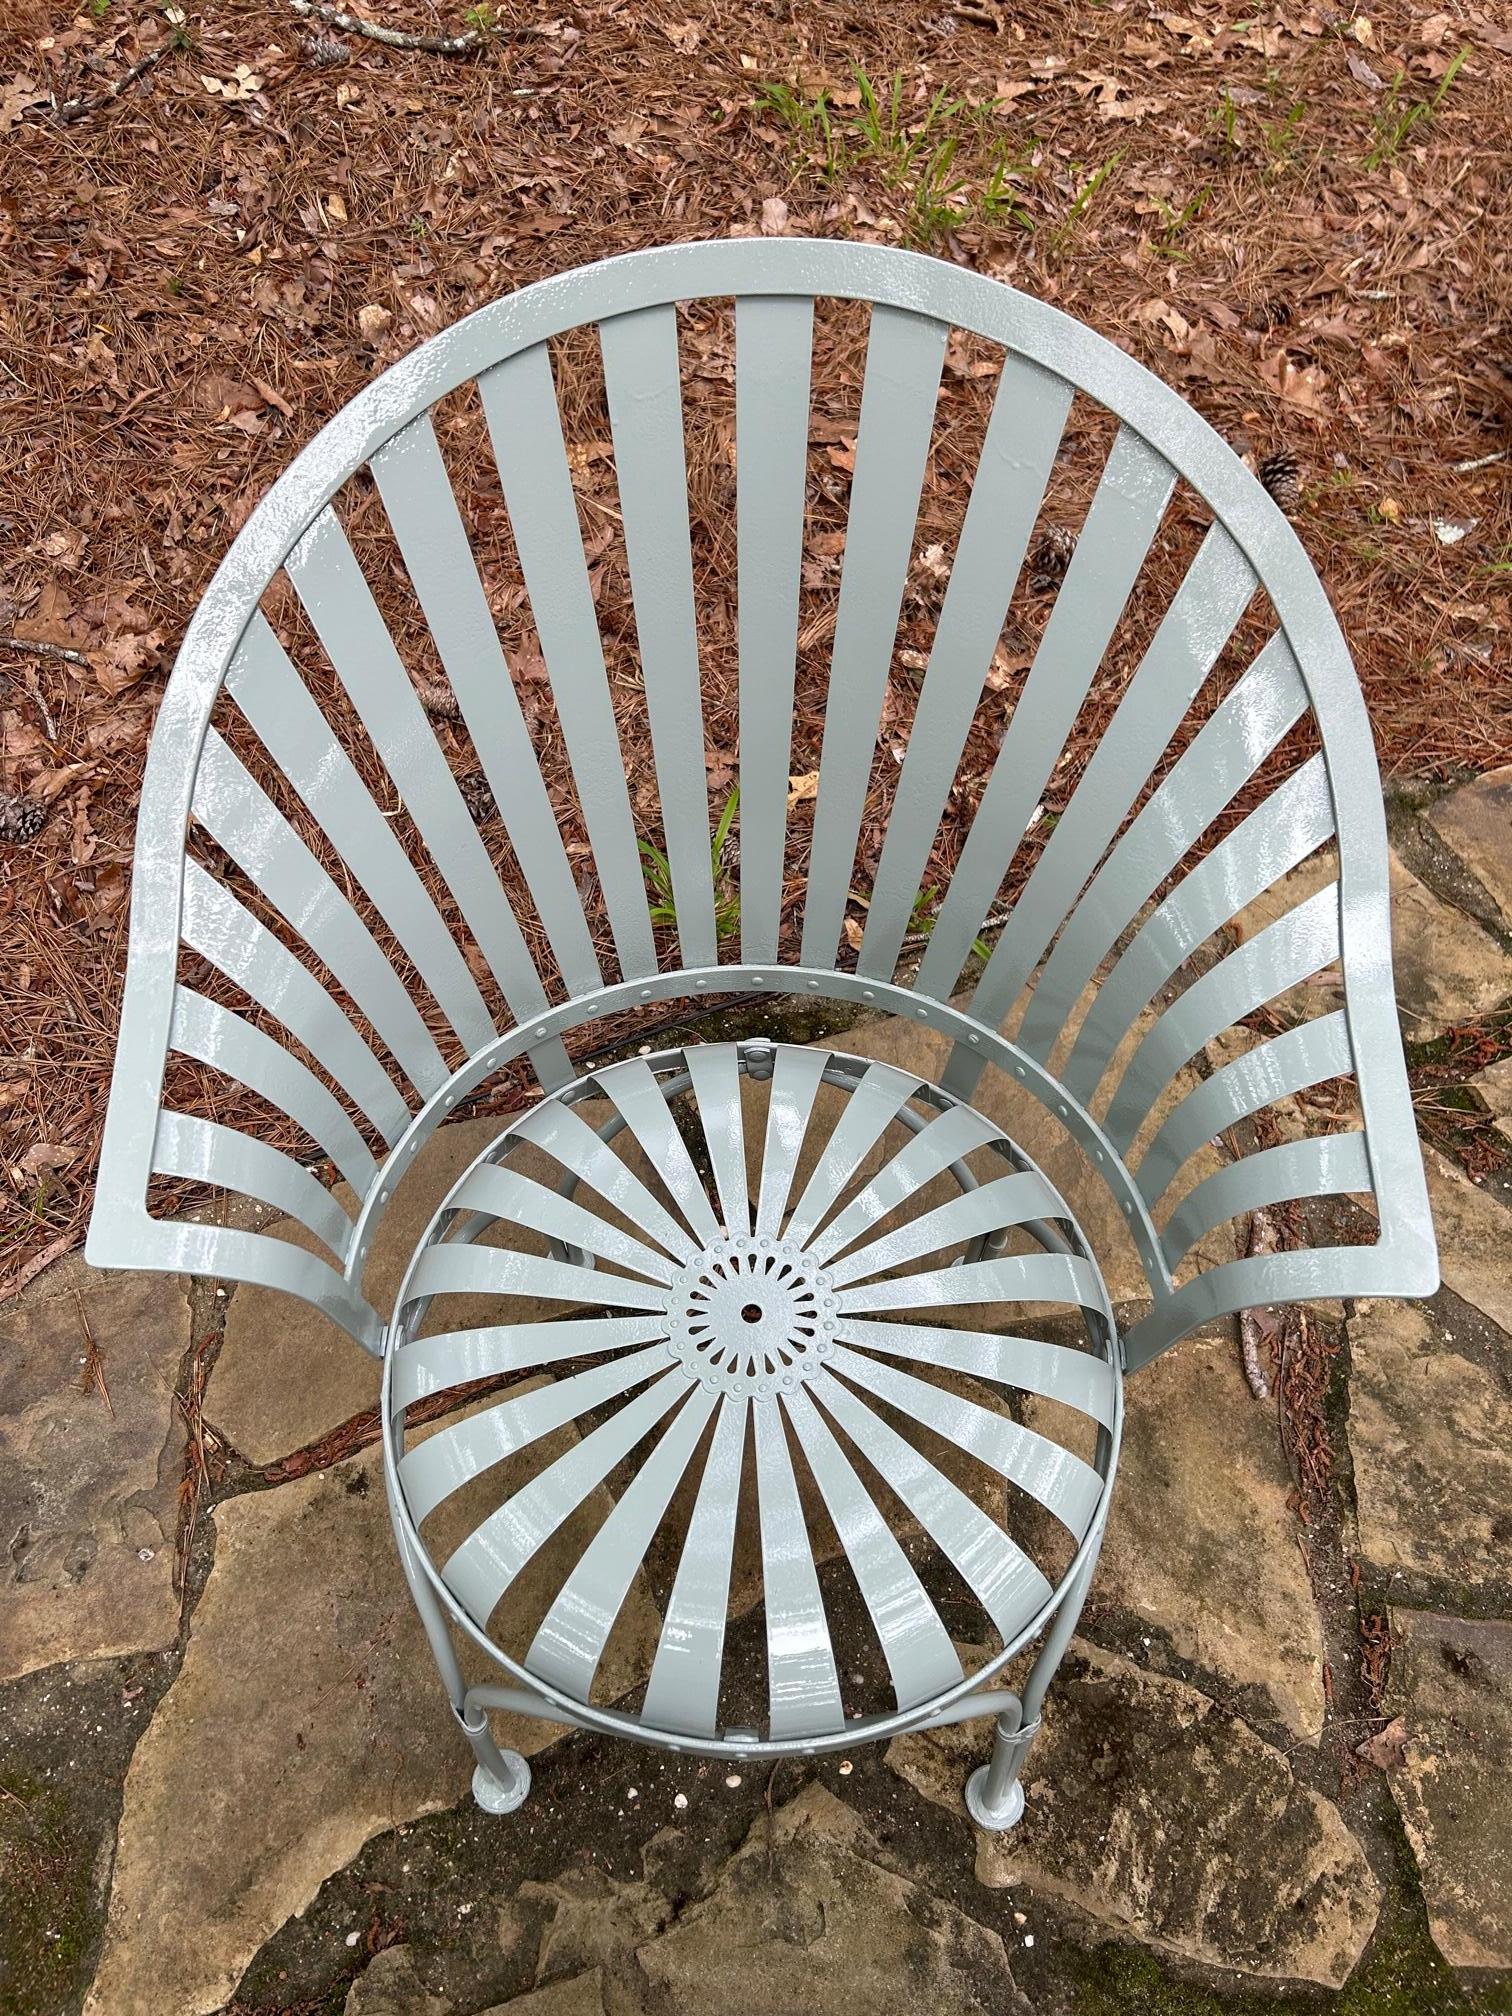 Restored Francois Carre Fanback Garden Chair.  This chair has undergone a thorough restoration process. The process began by taking each chair back to bare metal. Then each spring, stiffener, retainer and rivet in the seat bottom was replaced. The